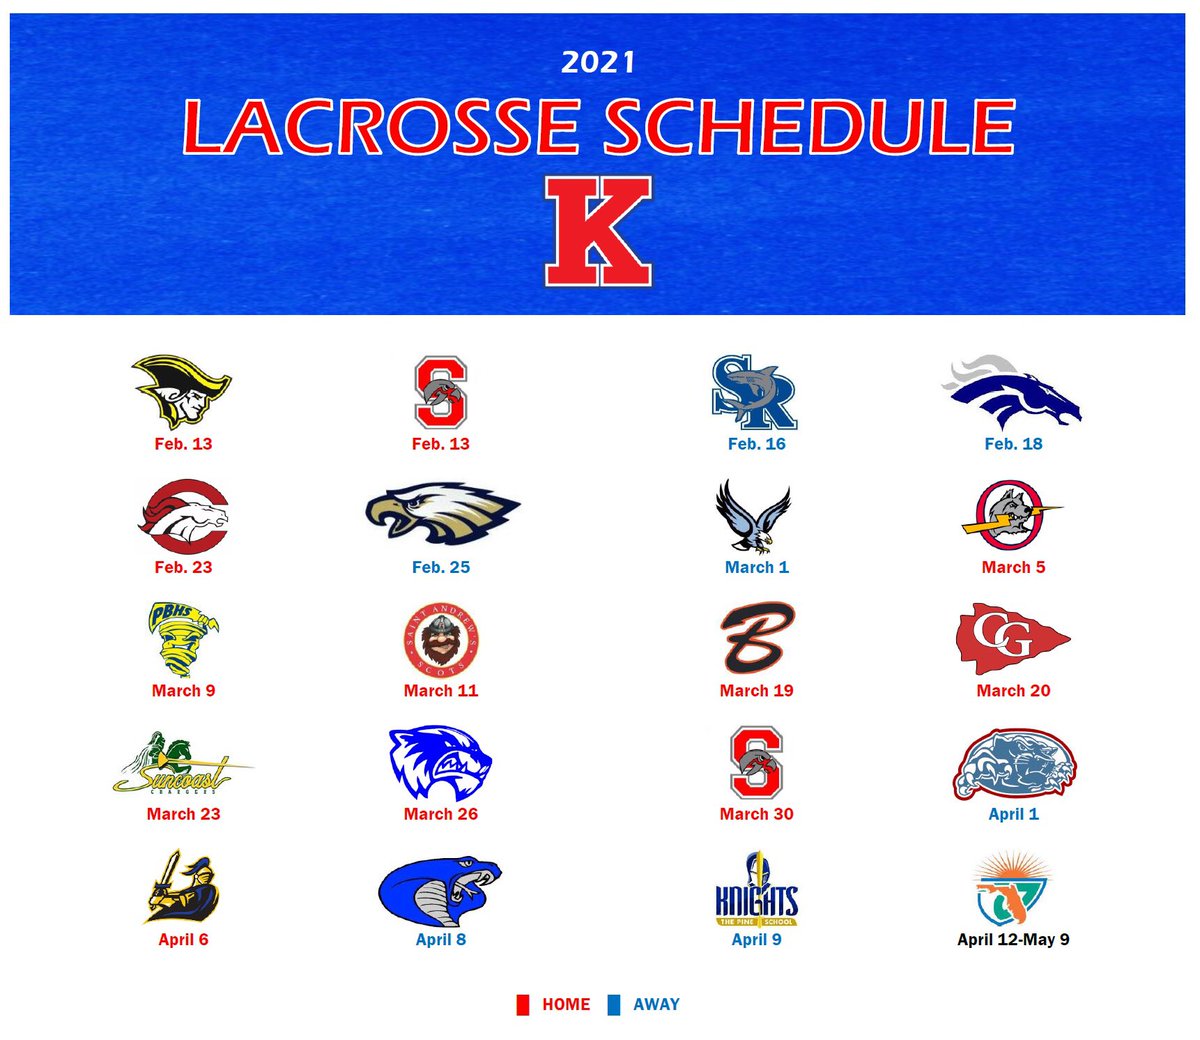 Counting down the days.... games are on the horizon...  LETS GOOOOOOOO!!!!! 😤😤😤😤😤😤 ❤️🦁🥍 #beprepared #bedisciplined #befocused @tkalions #thelionlife🔵🔴🦁